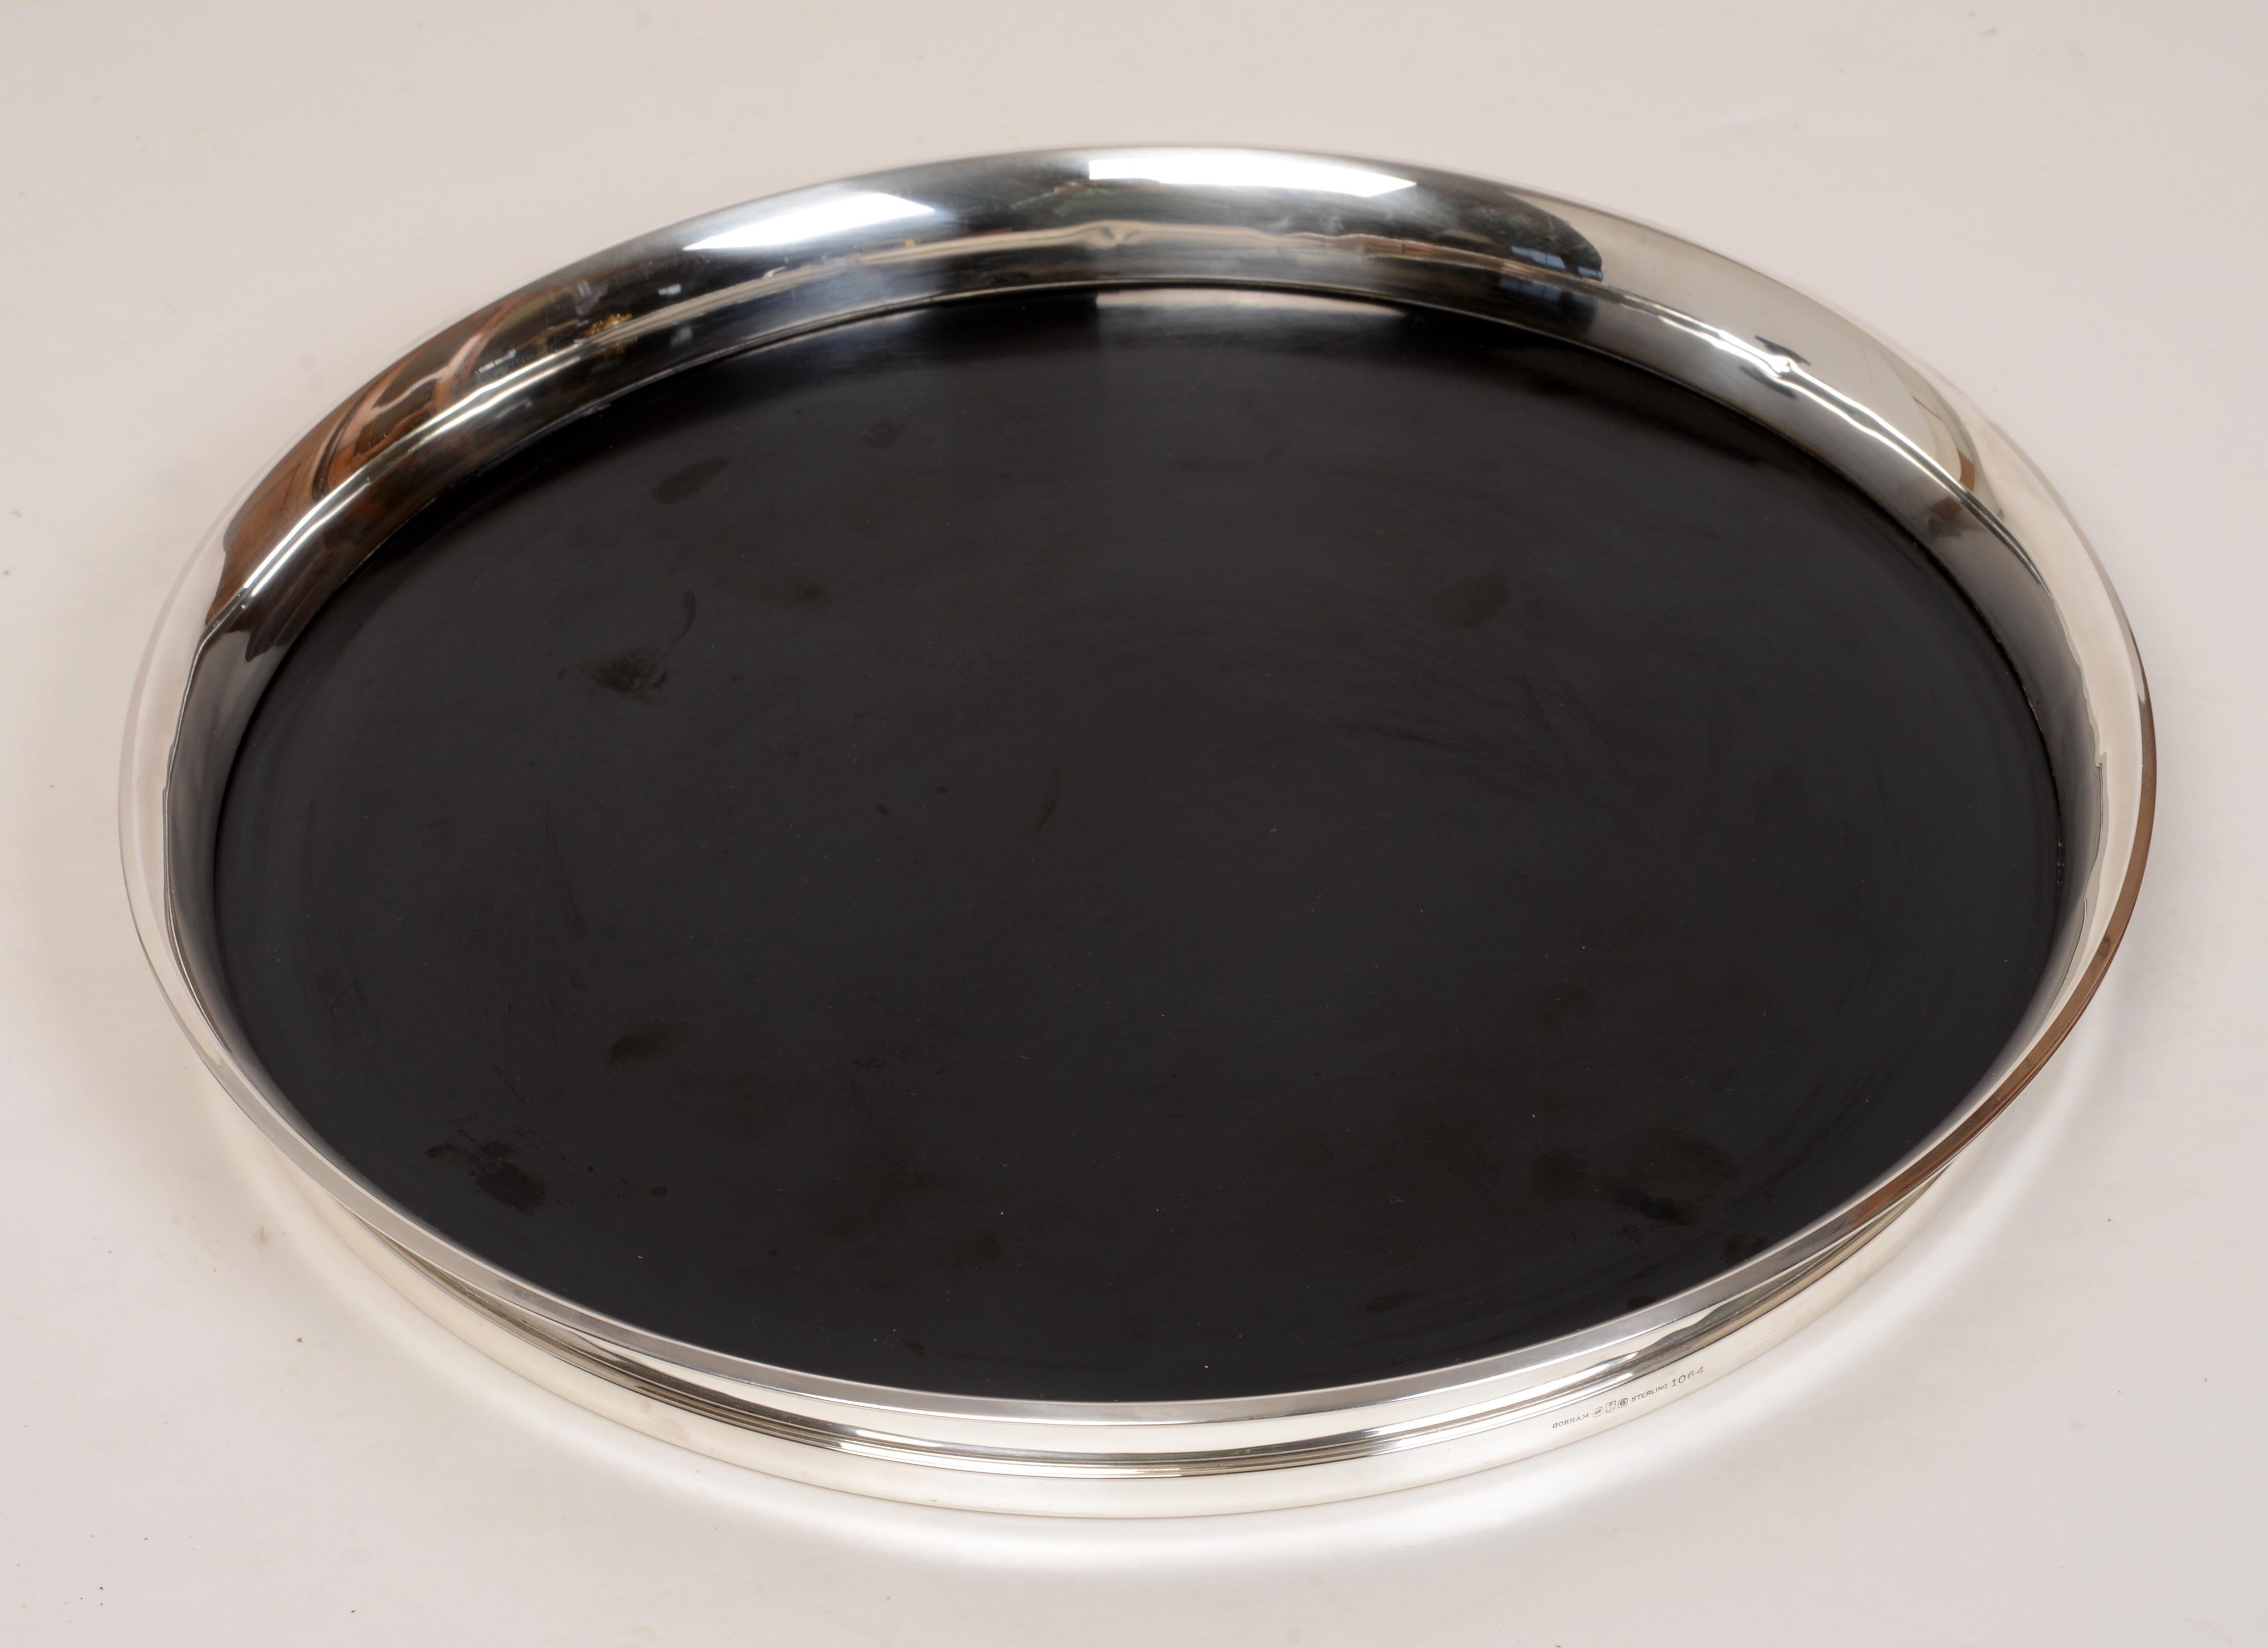 American Art Deco Gorham Sterling Silver Tray with Black Laminate